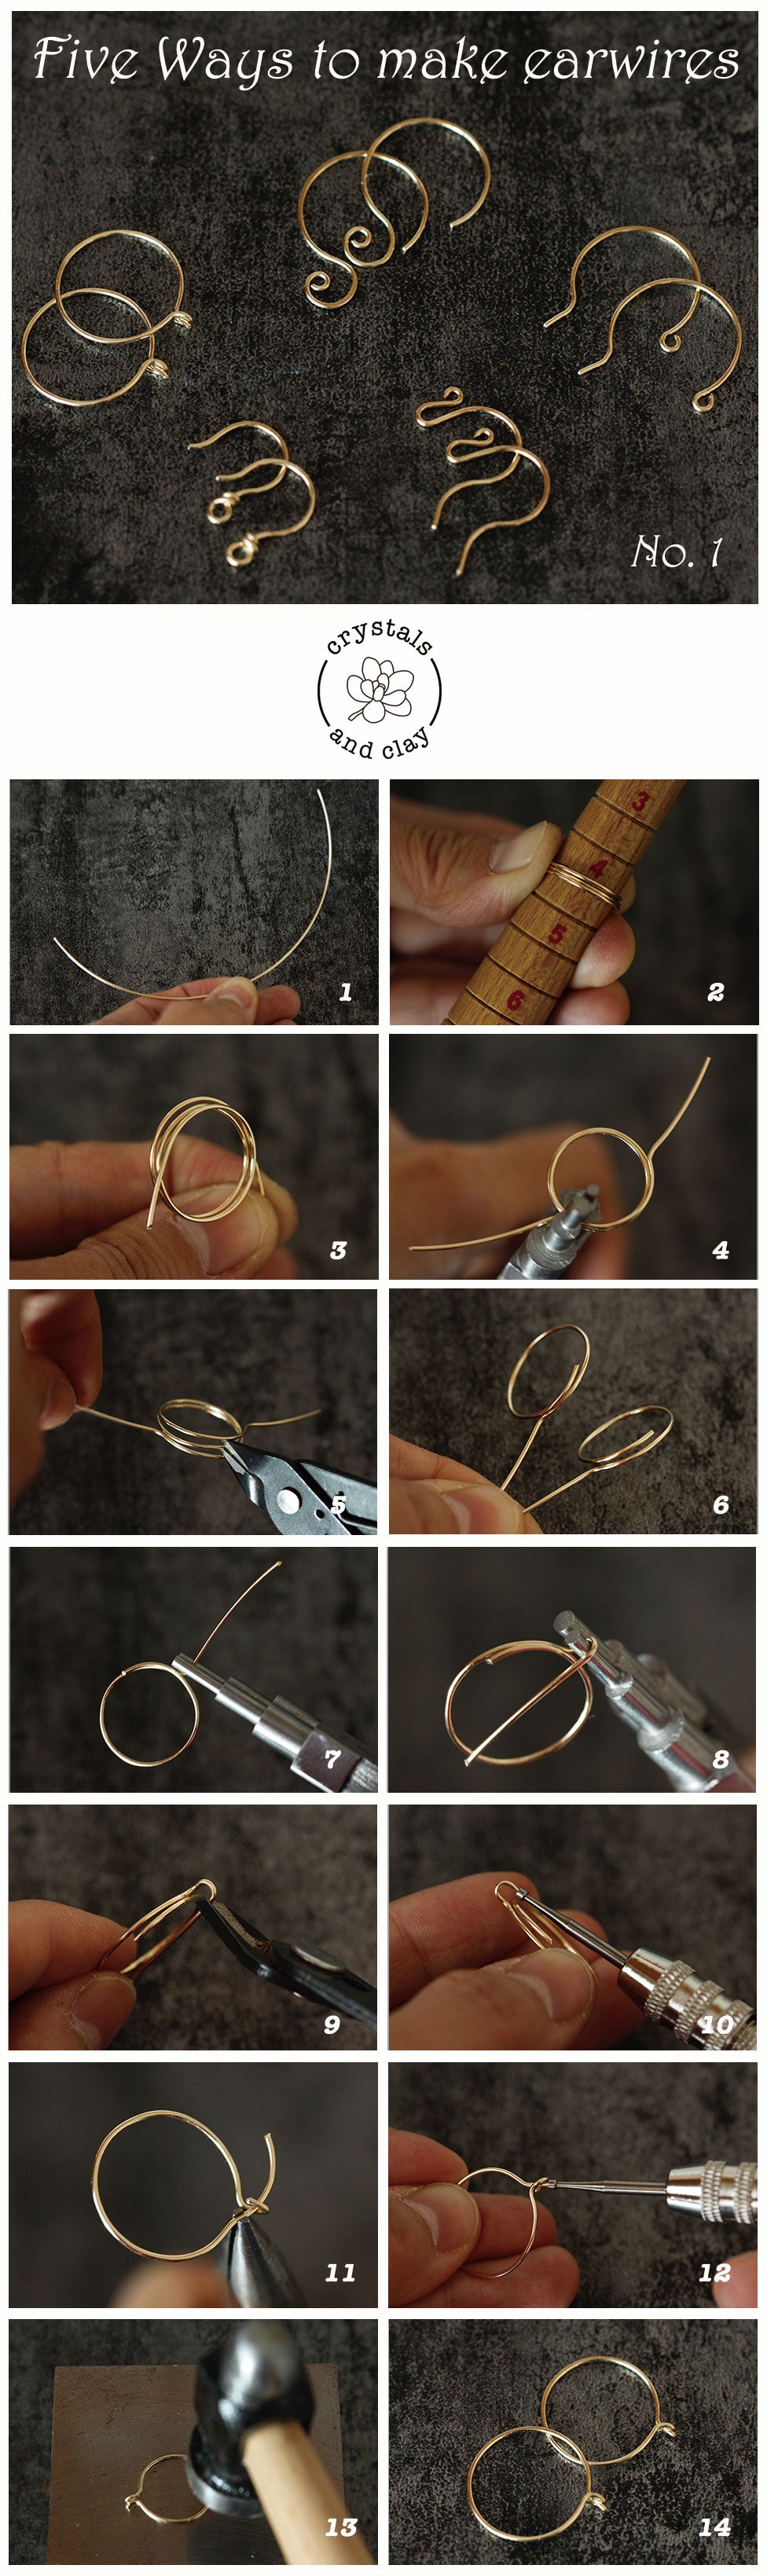 How to Make Square or Diamond Shaped Earwires - Jewelry Tutorial 